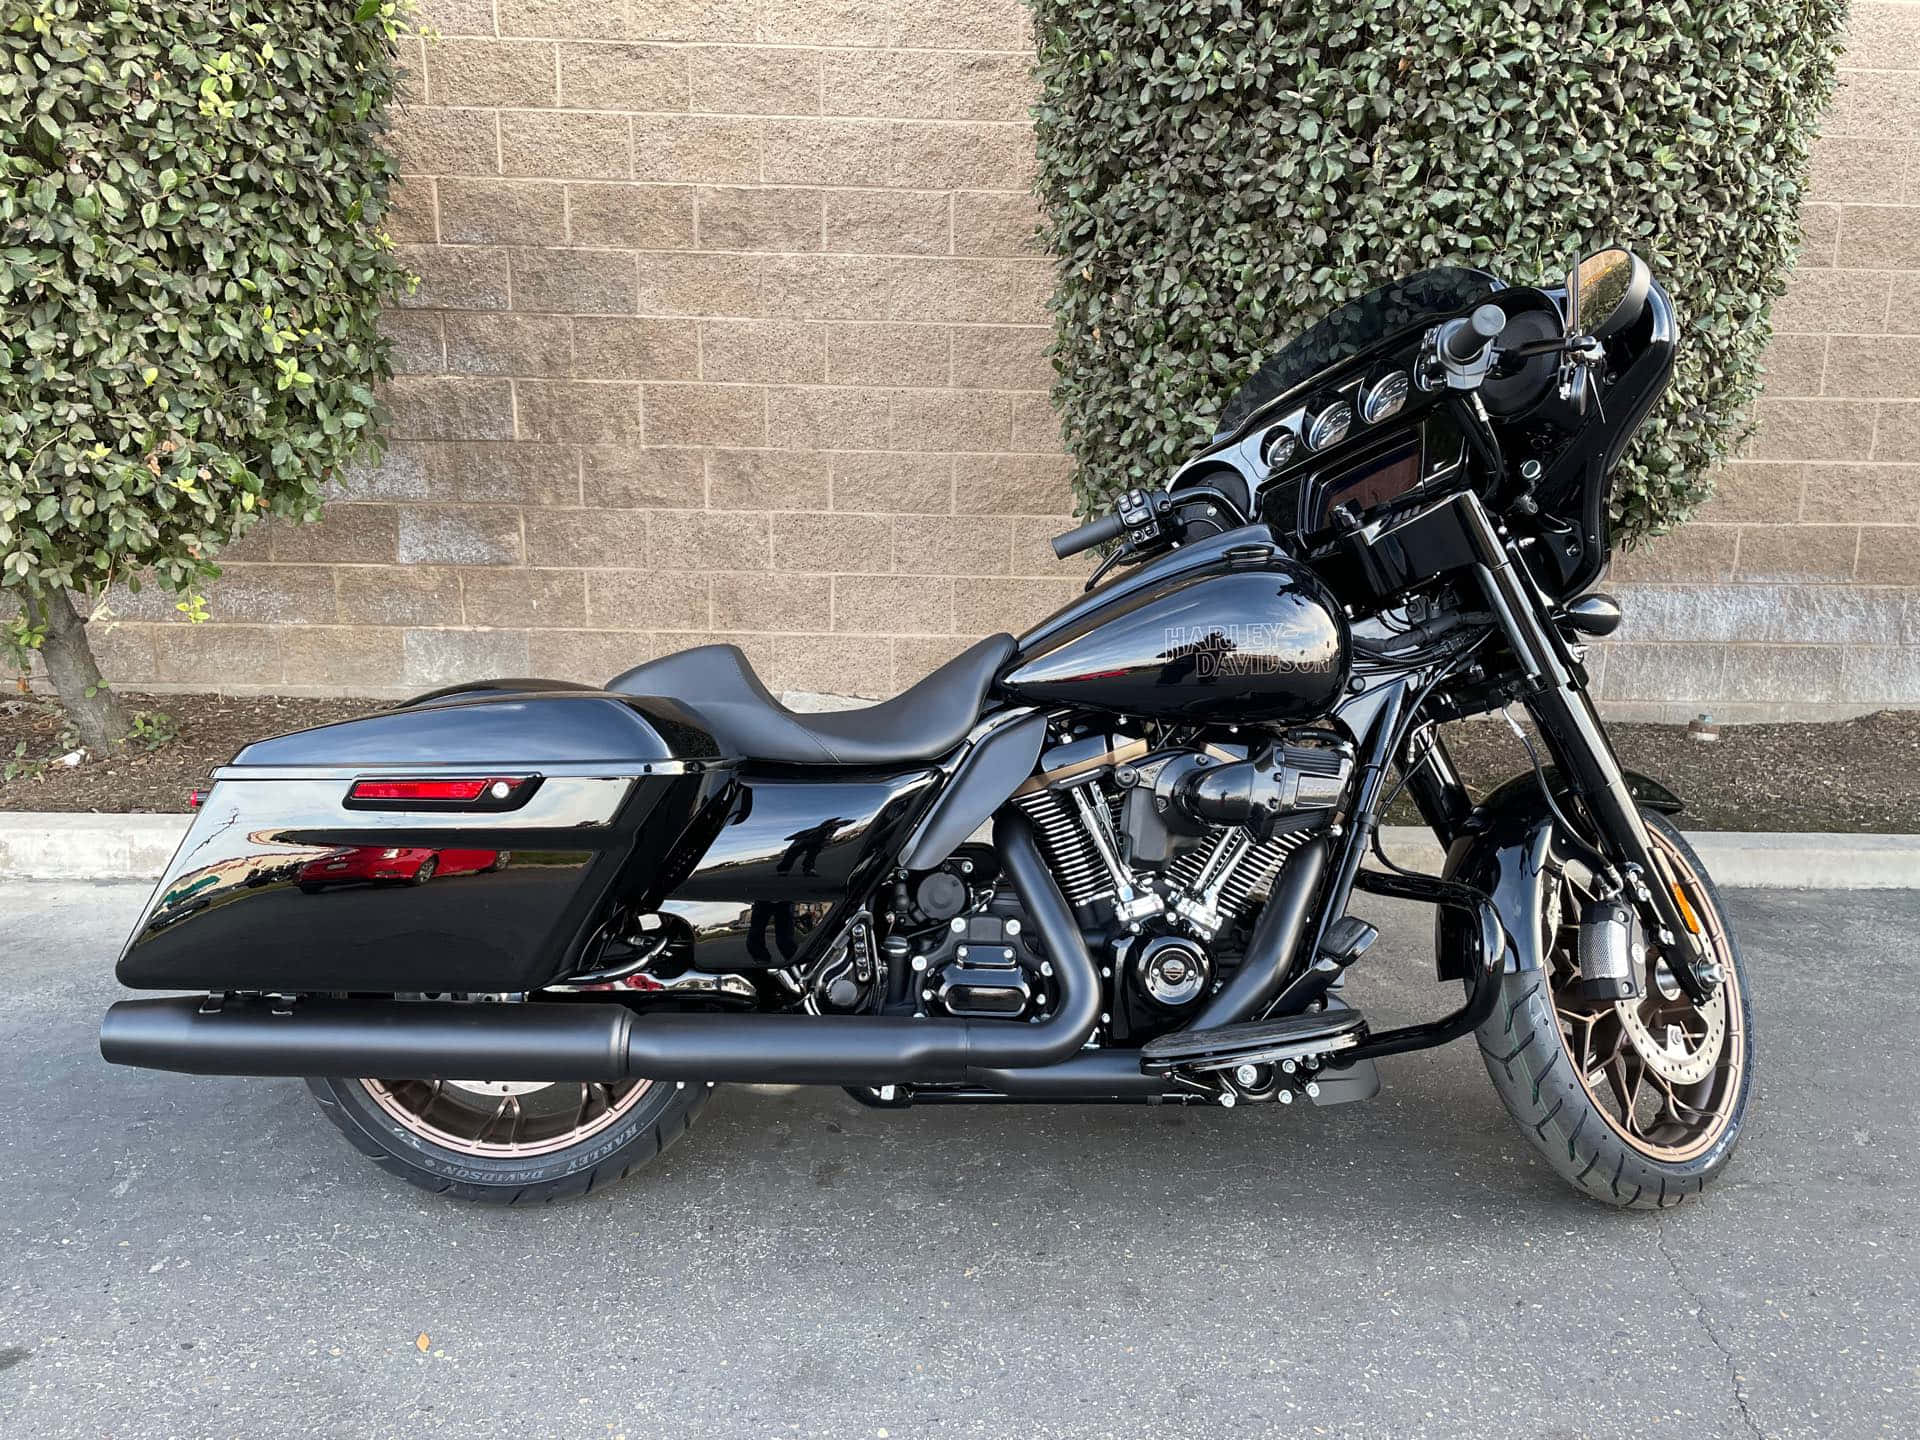 Enjoy the Thrill of the Open Road in the Iconic Harley Davidson